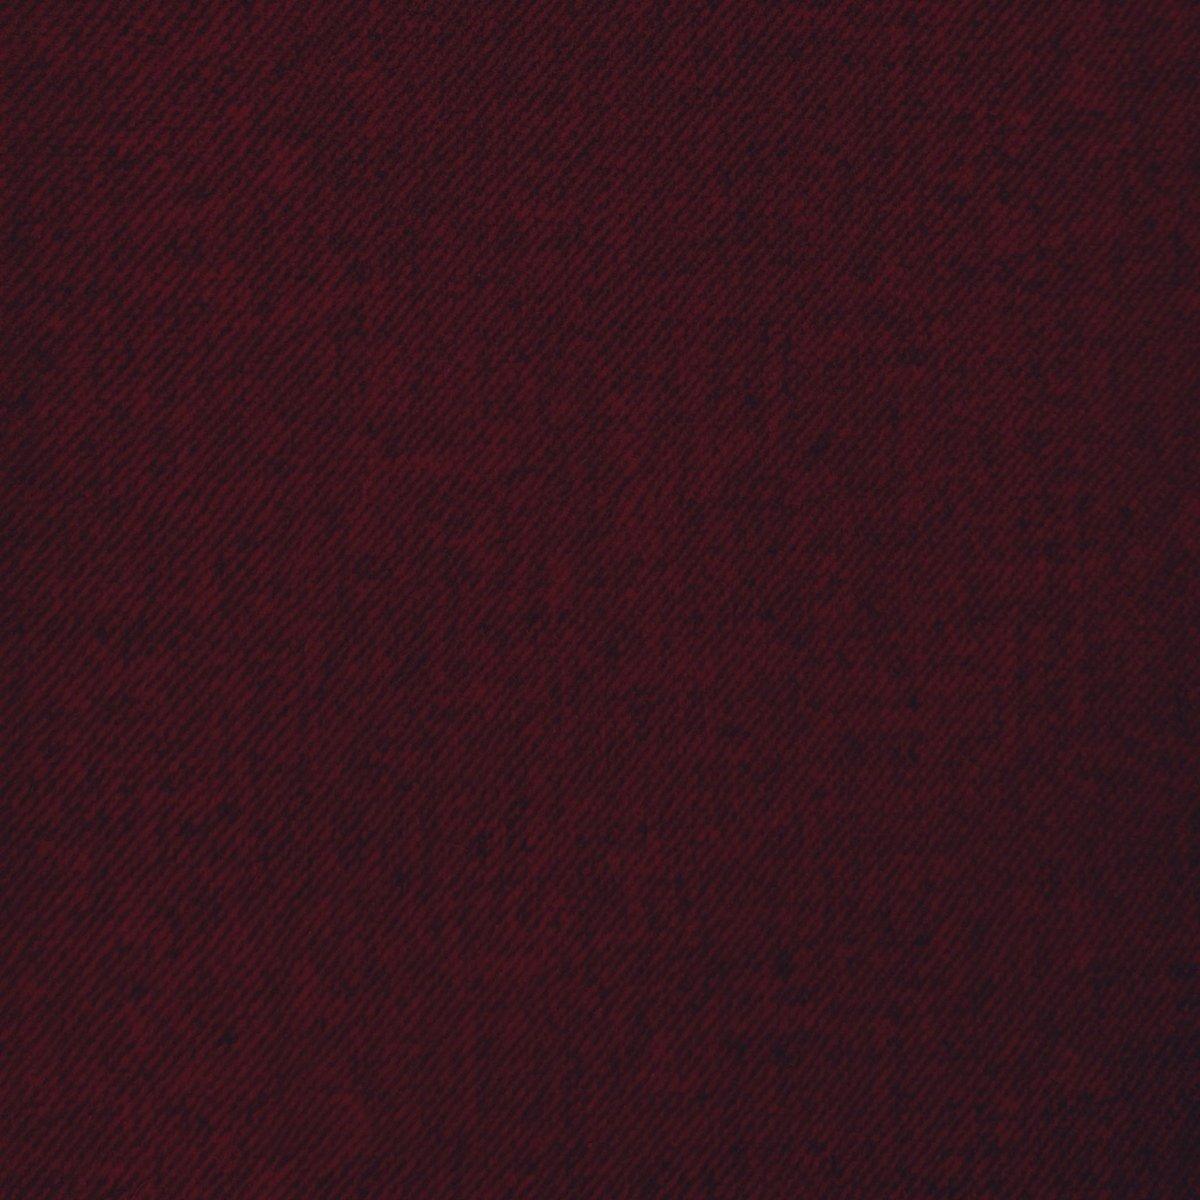 Highly durable wine upholstery fabric